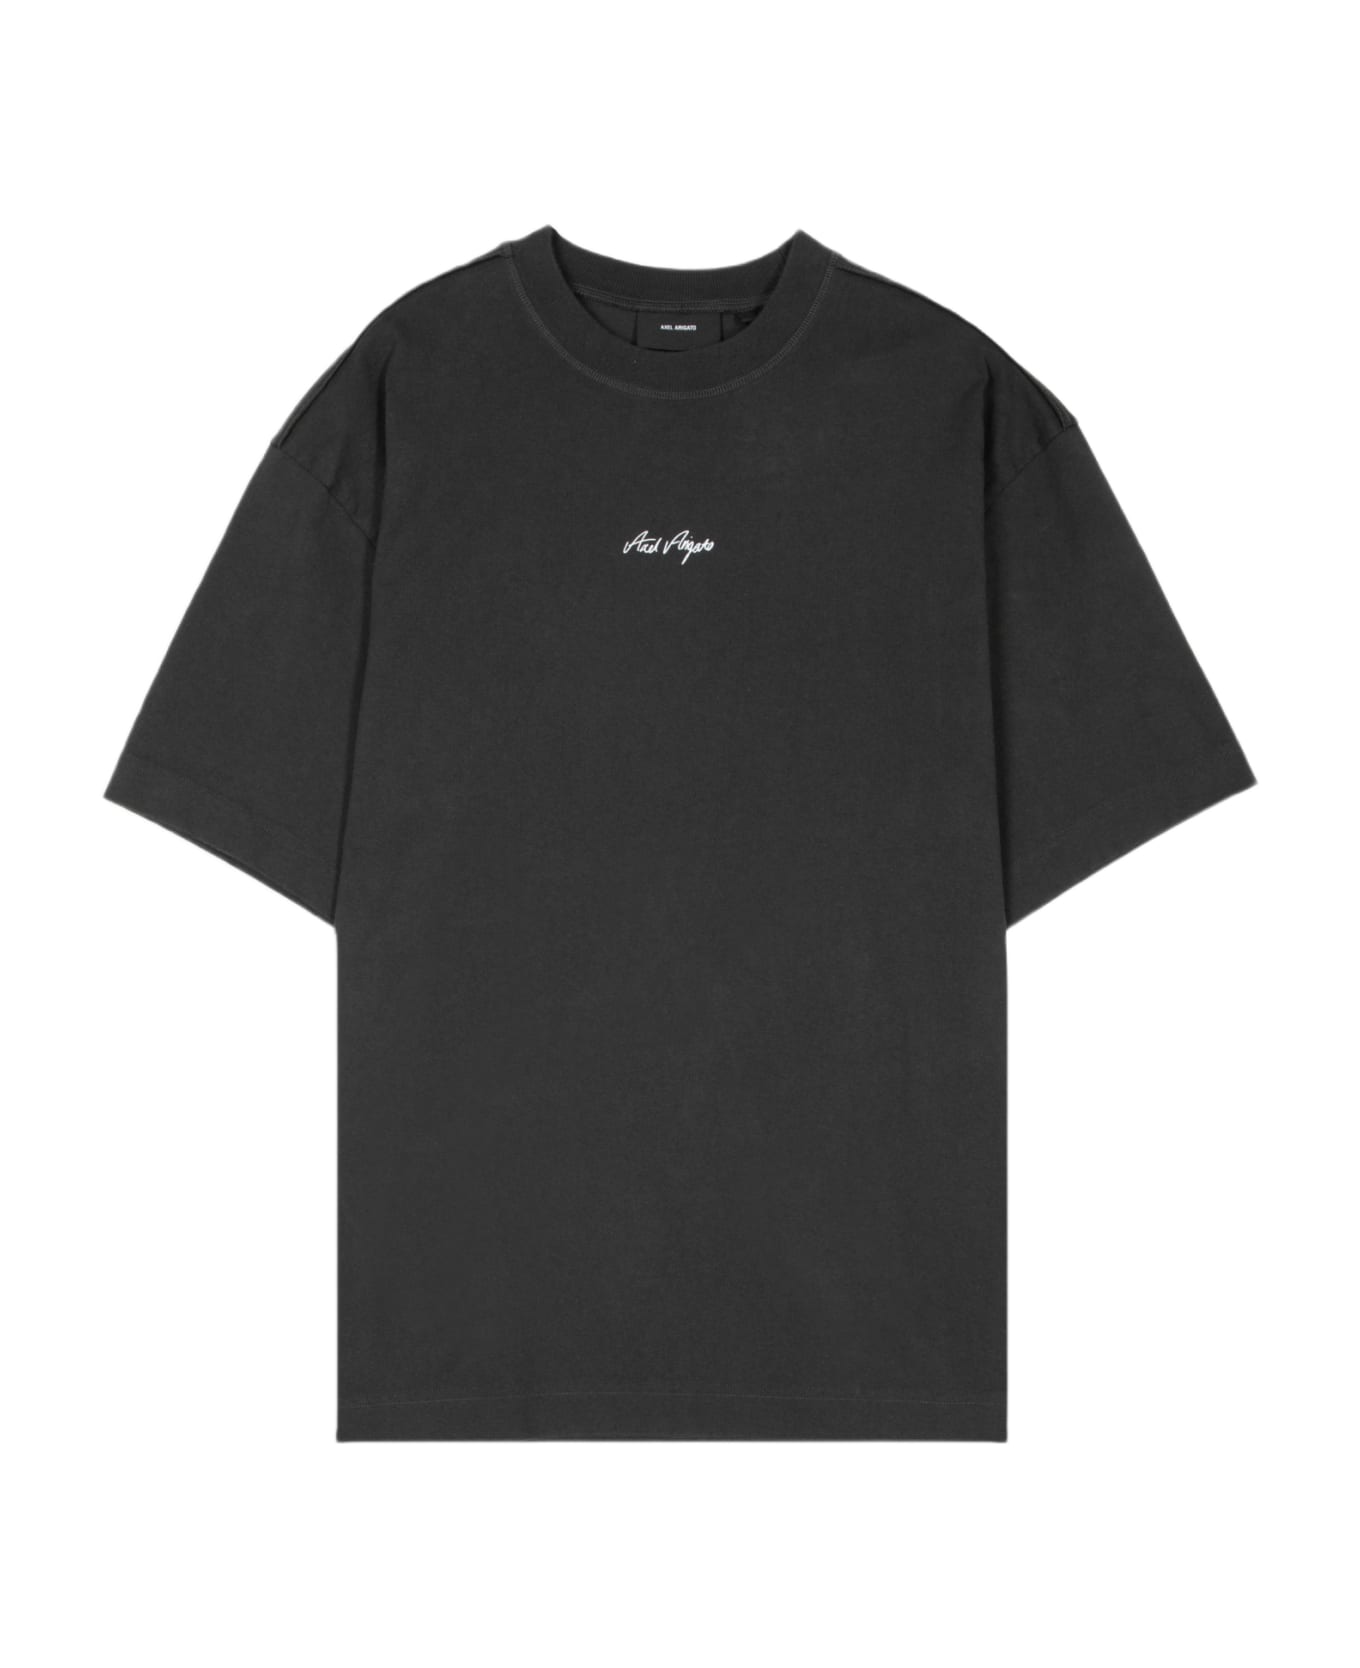 Axel Arigato Sketch T-shirt Faded black t-shirt with italic logo print - Essential T-shirt - Antracite